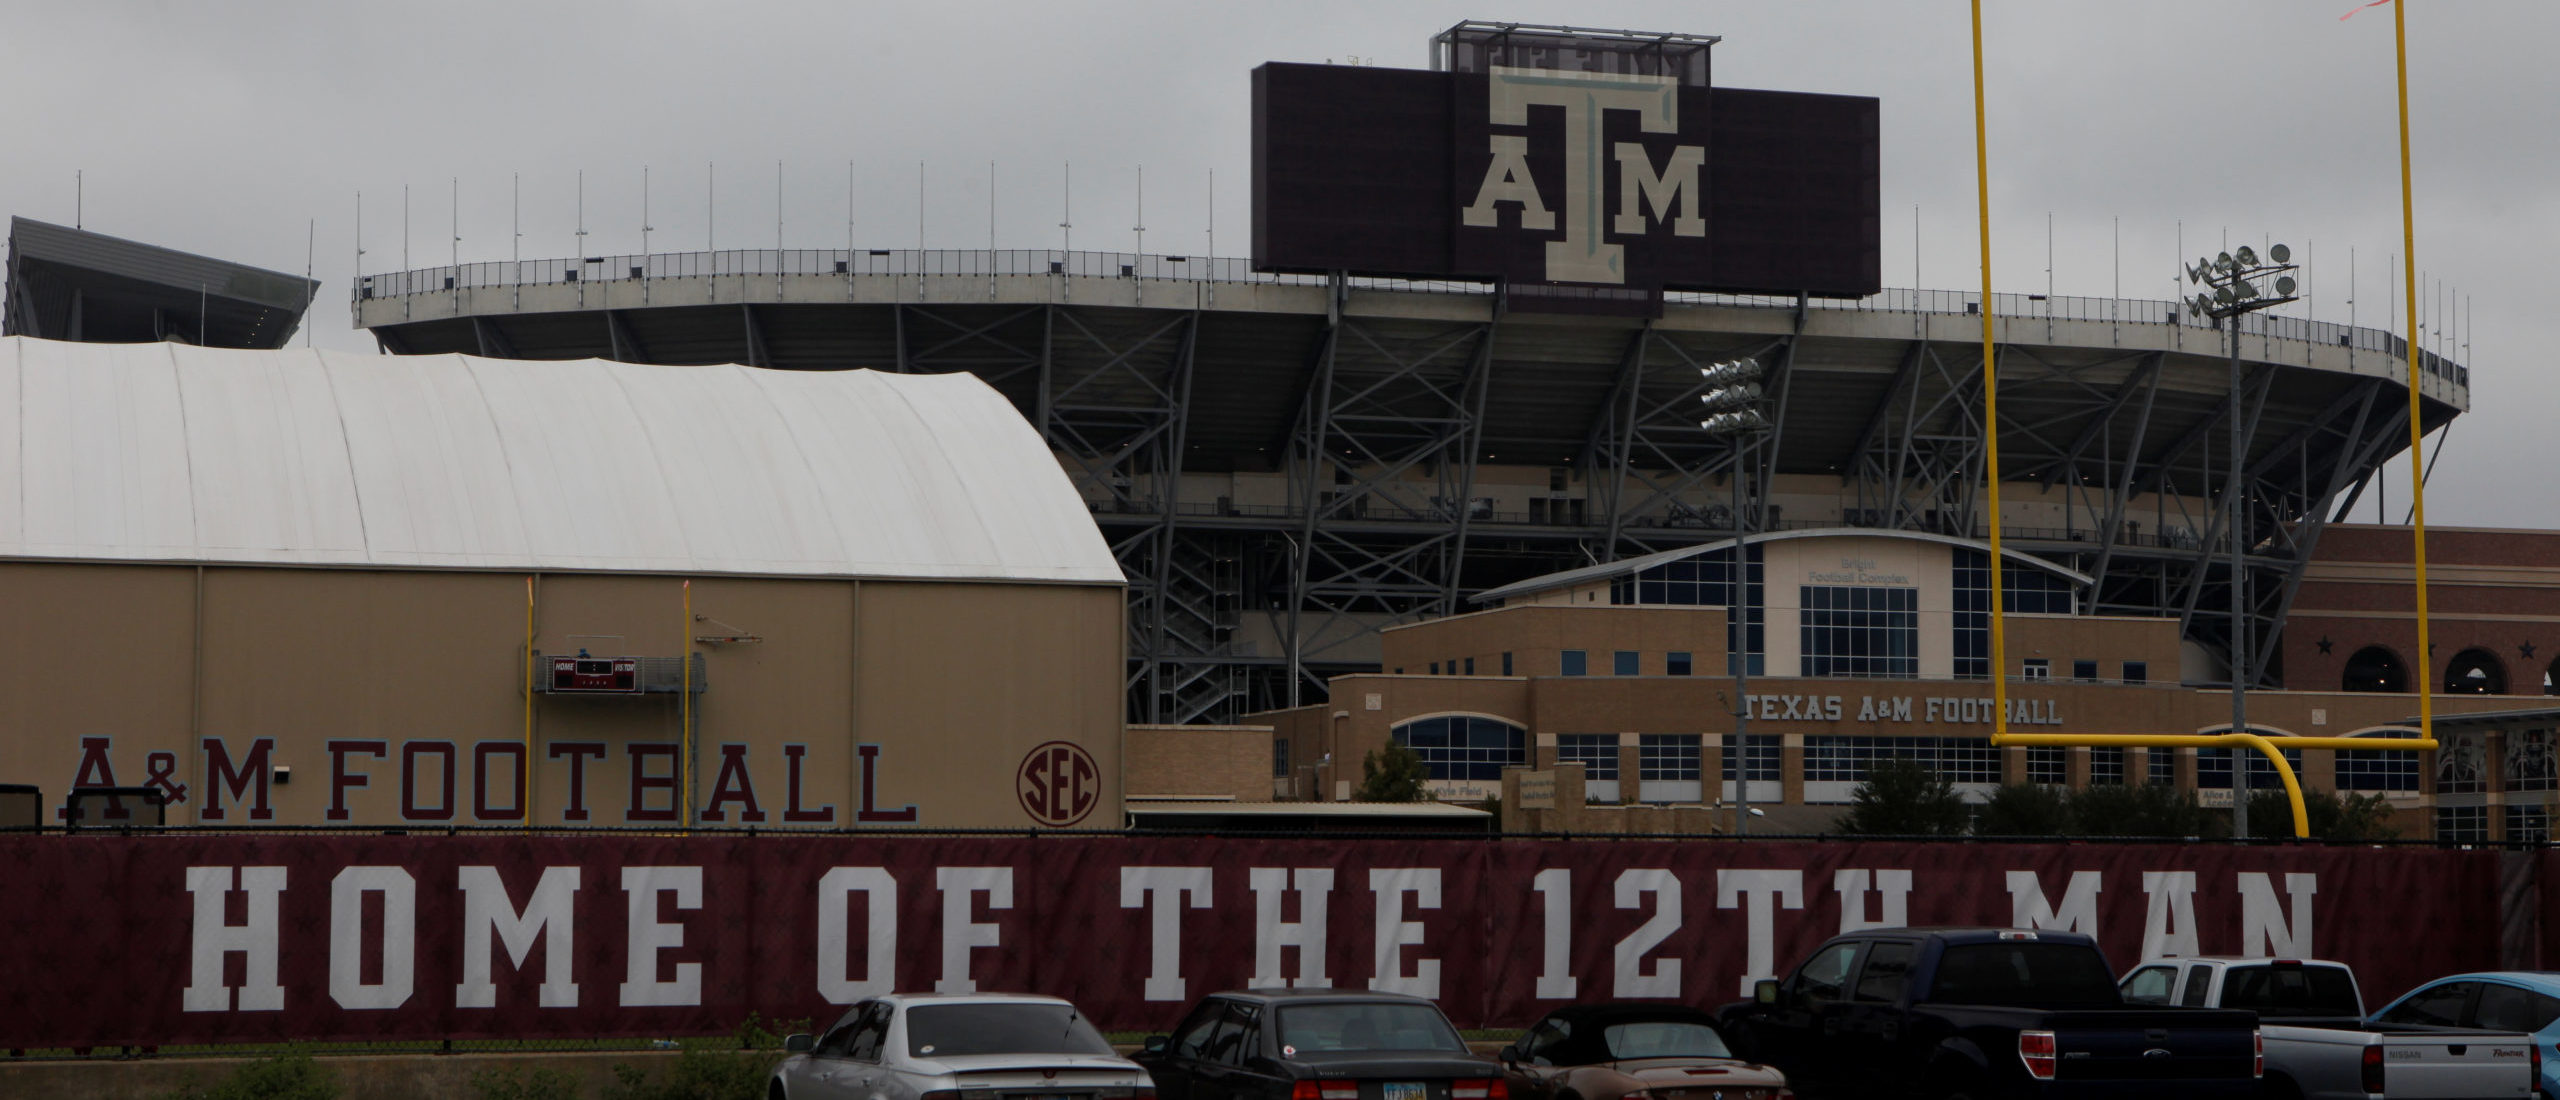 Texas A&M's Unreported Foreign Funding - WSJ